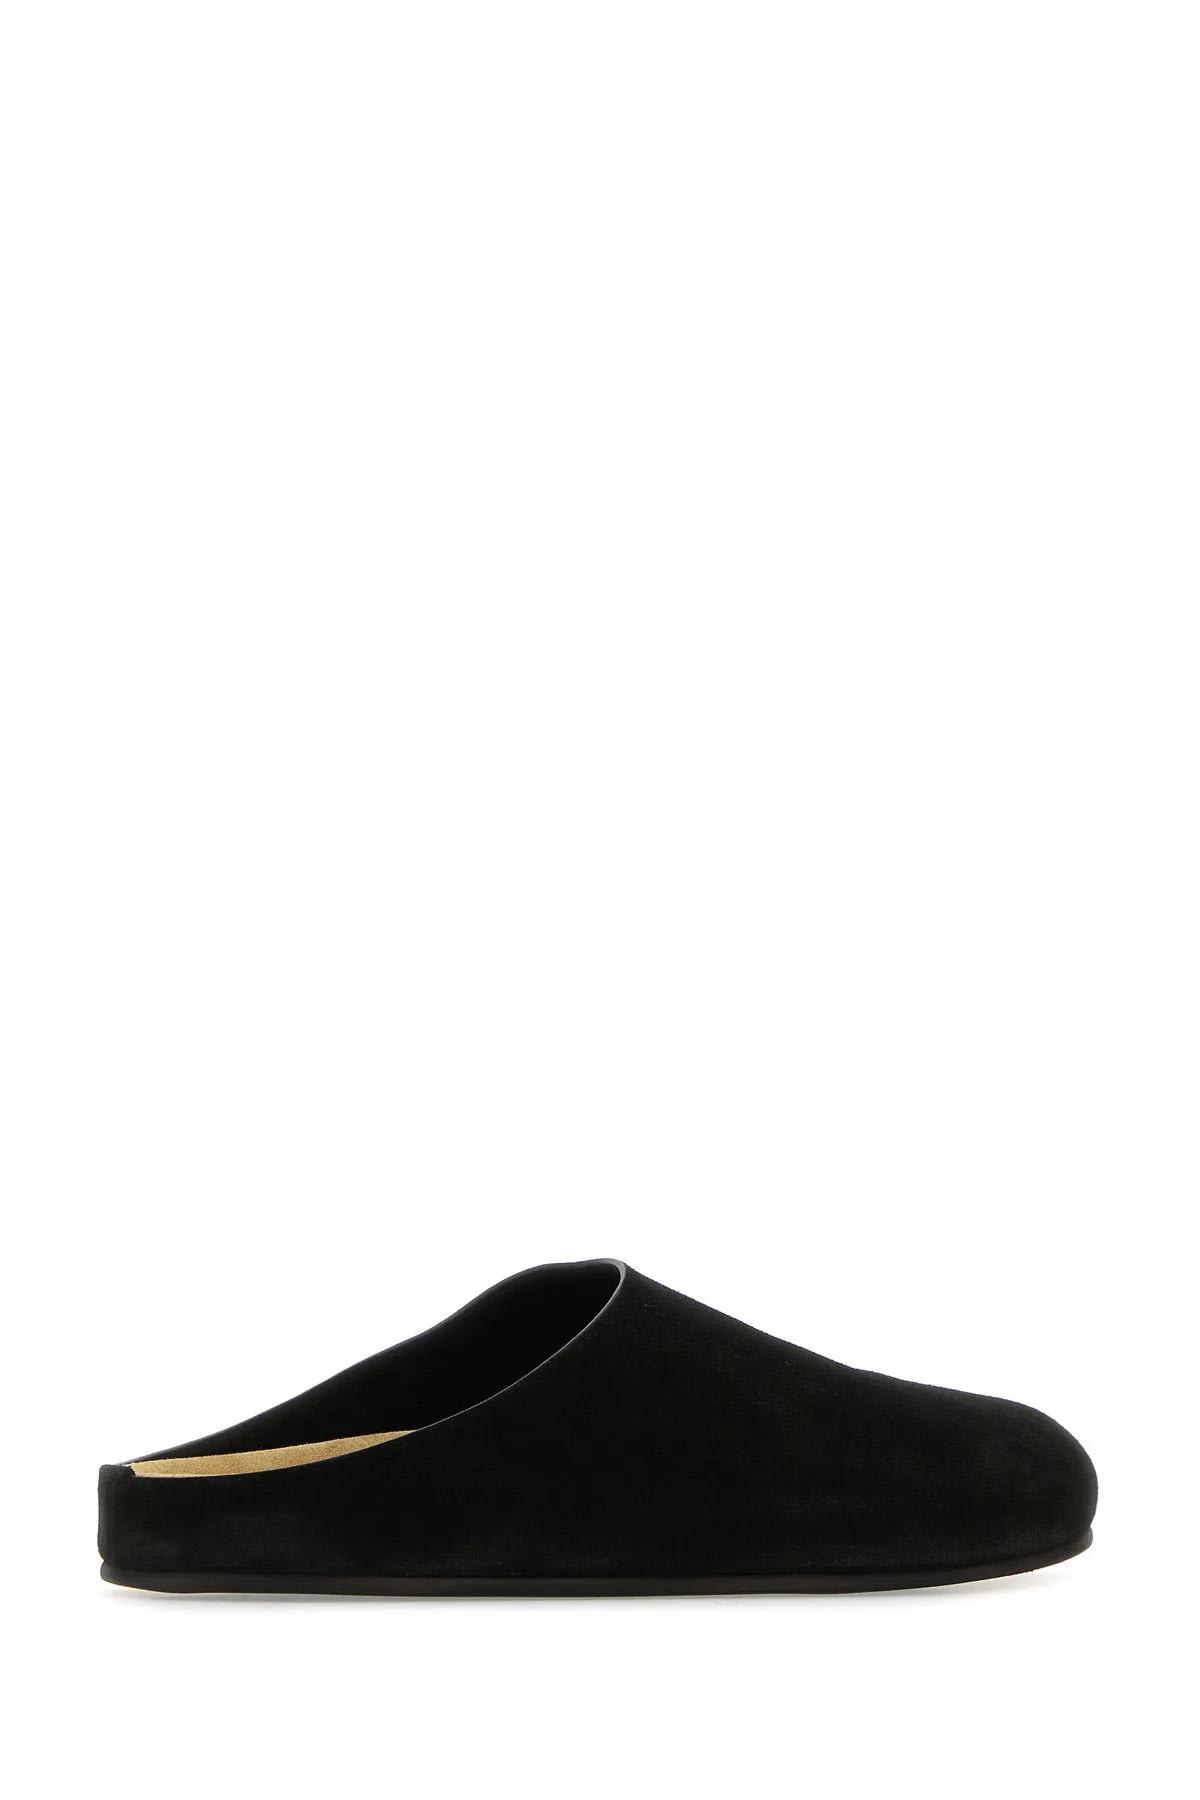 Shop The Row Black Suede Hugo Slippers